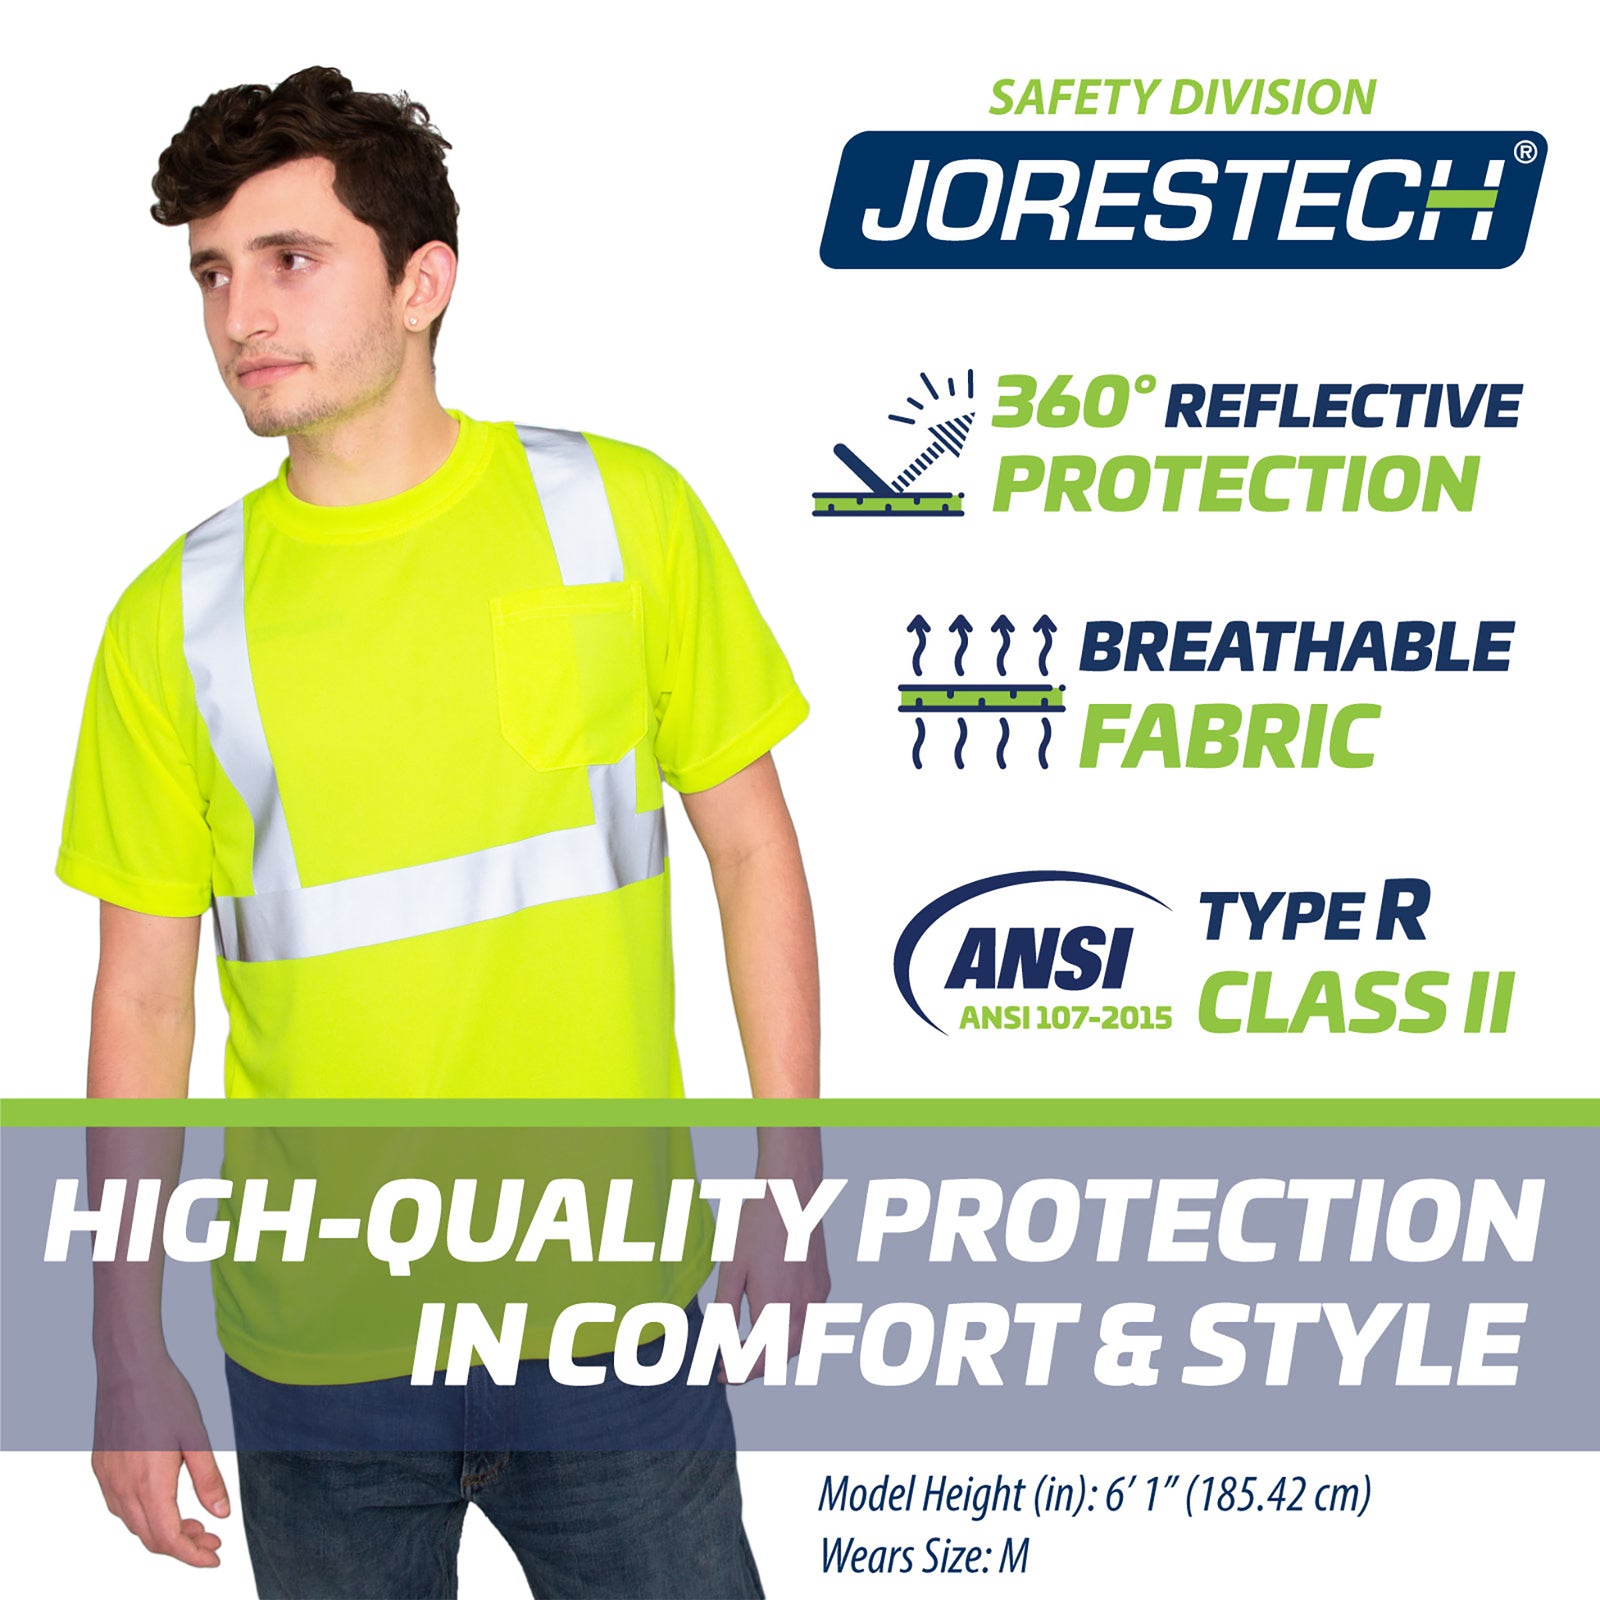 A worker wearing the Jorestech all yellow safety shirt. Icons with text read: 360 degrees of reflective protection. Breathable fabric. Type R class II. High quality protection in comfort and style.